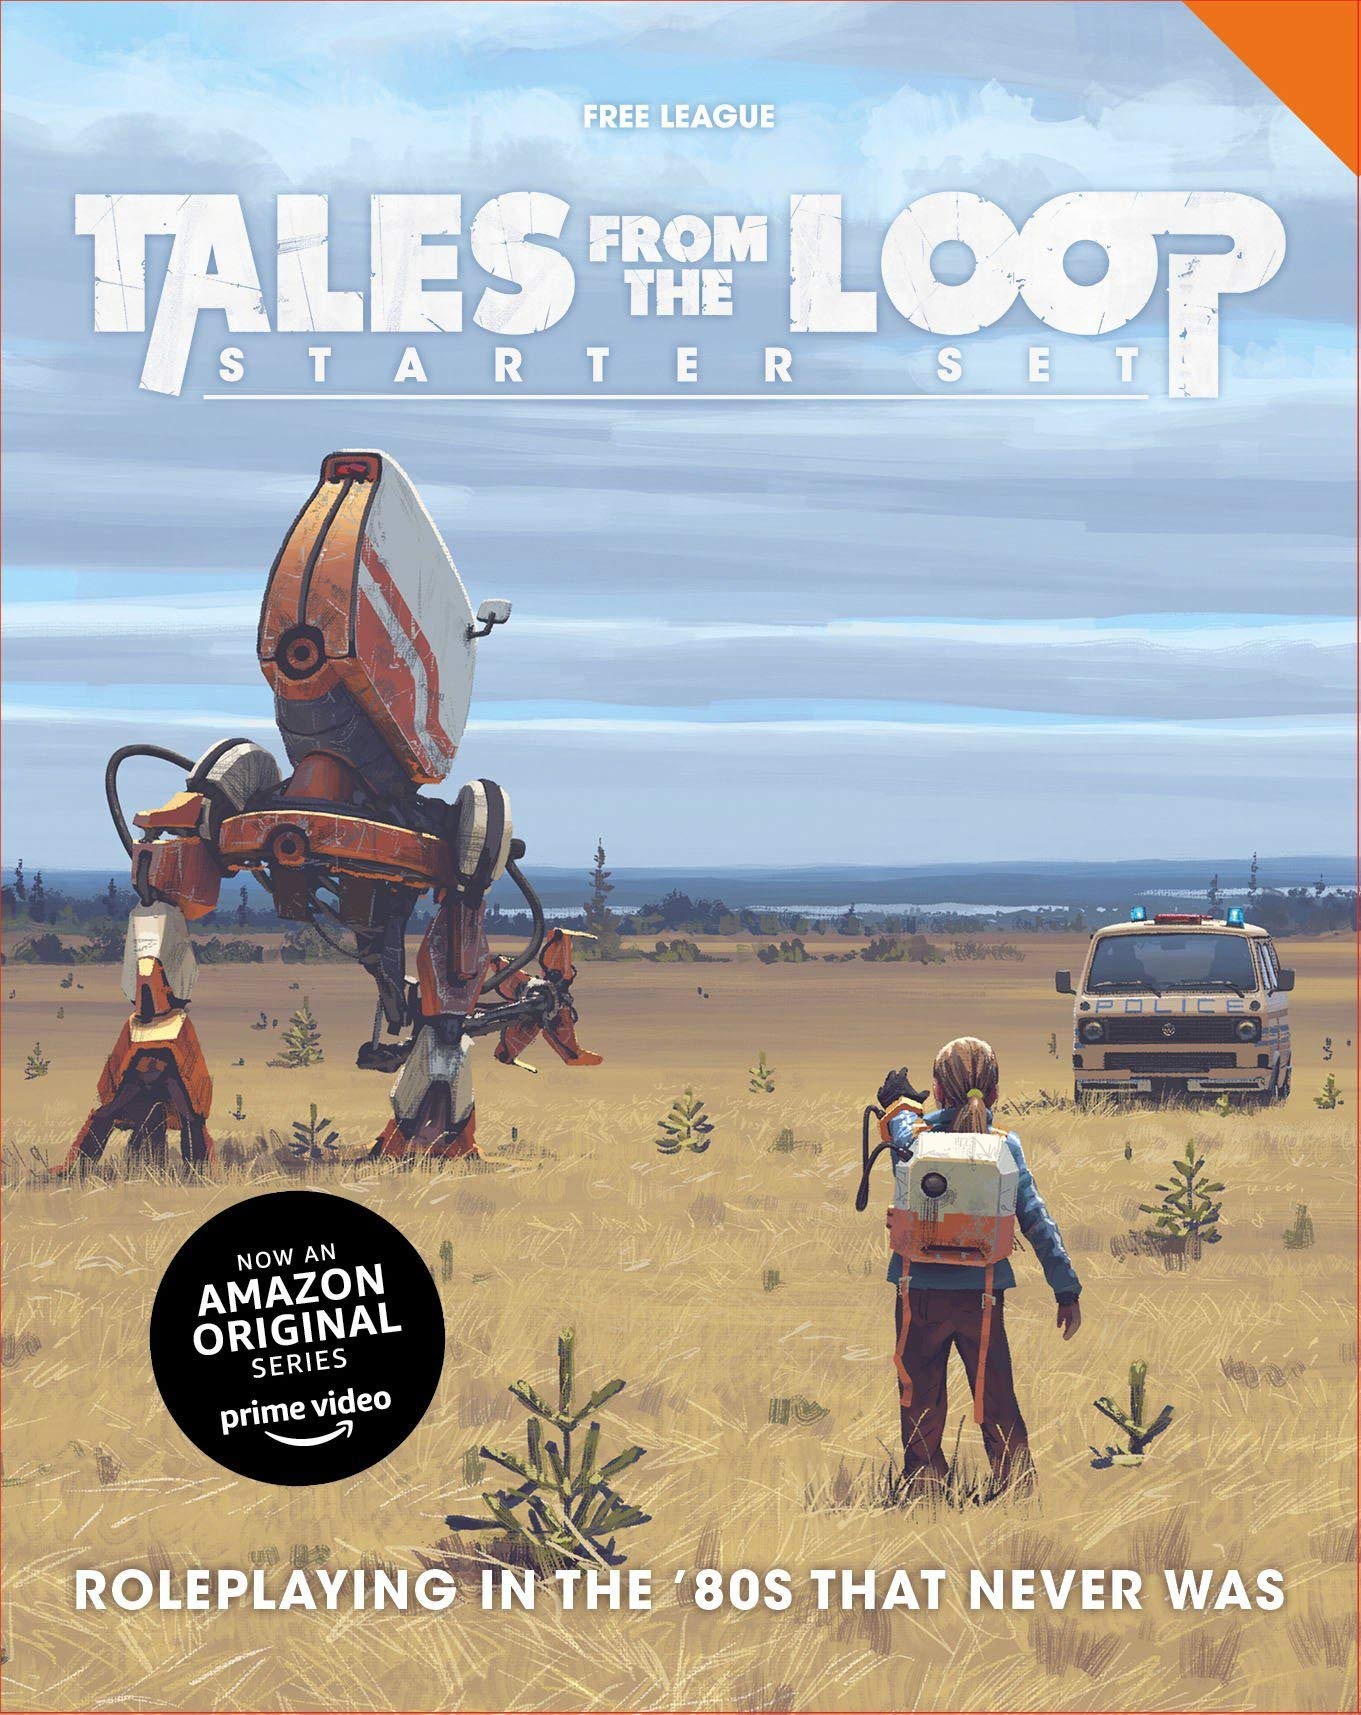 Livres/sci-fi : Tales from the Loop/Things from the flood (Simon Stålenhag)